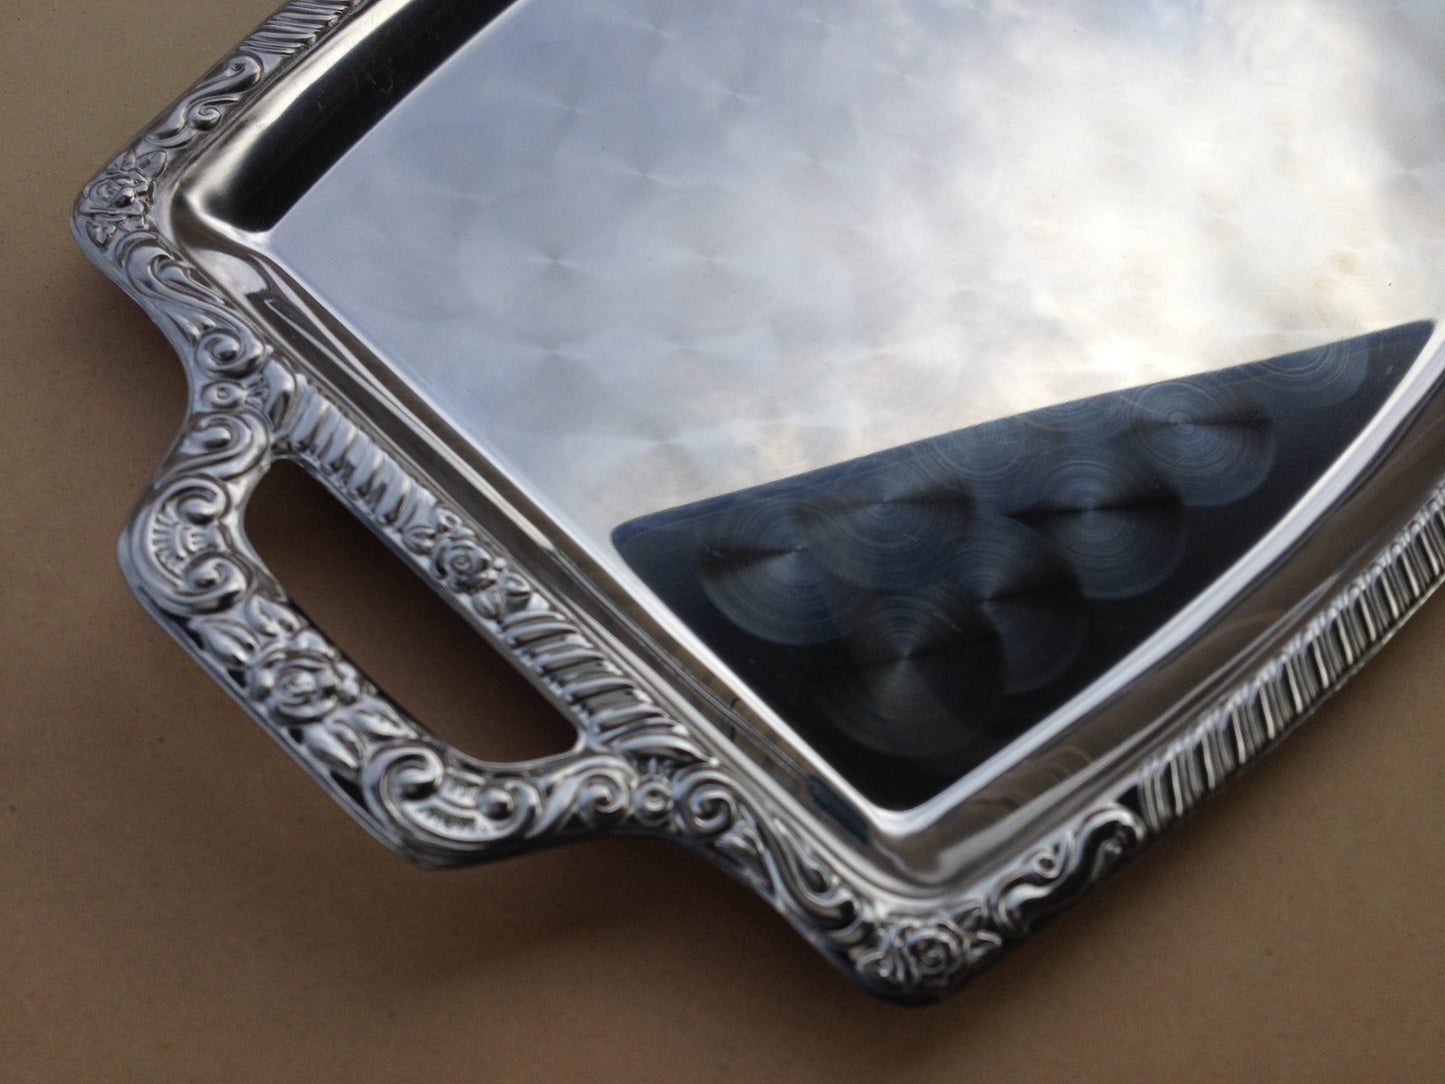 Entertaining Tray Stainless Steal with Floral Detail